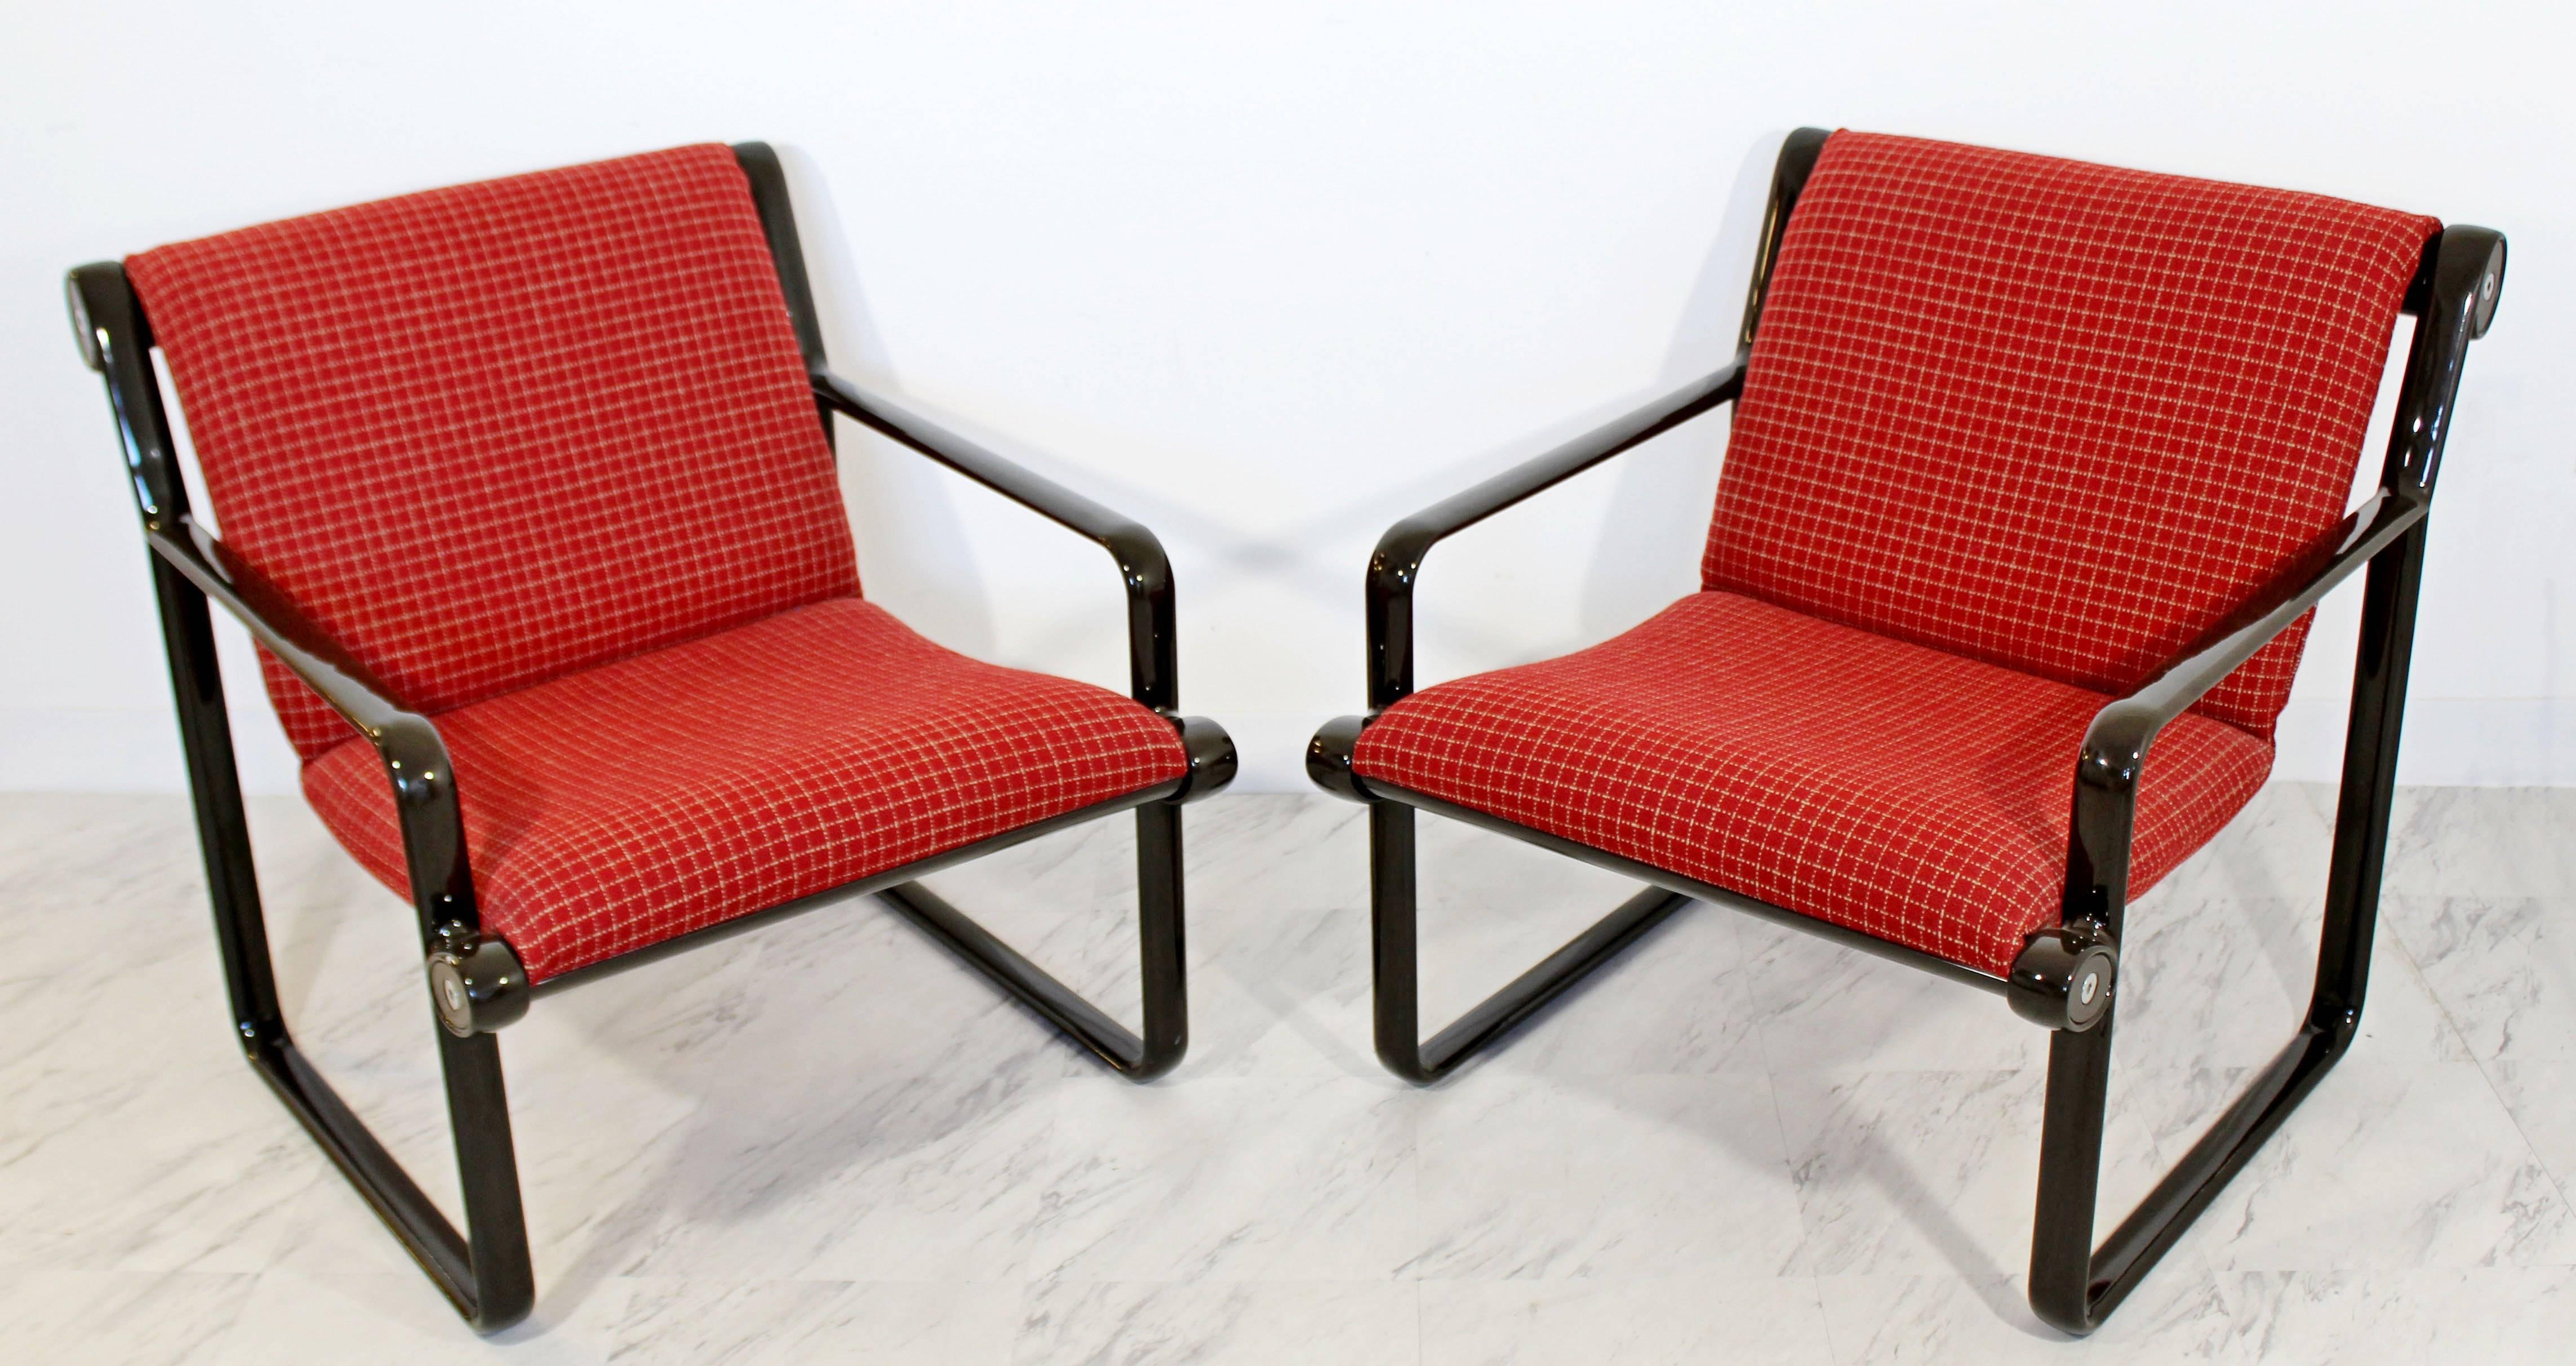 For your consideration is a magnificent, pair of original sling, lounge armchairs, in brown and with a red upholstery, designed by Hannah and Morrison for Knoll, circa 1970s. In excellent condition. Original fabric. With original tags. The